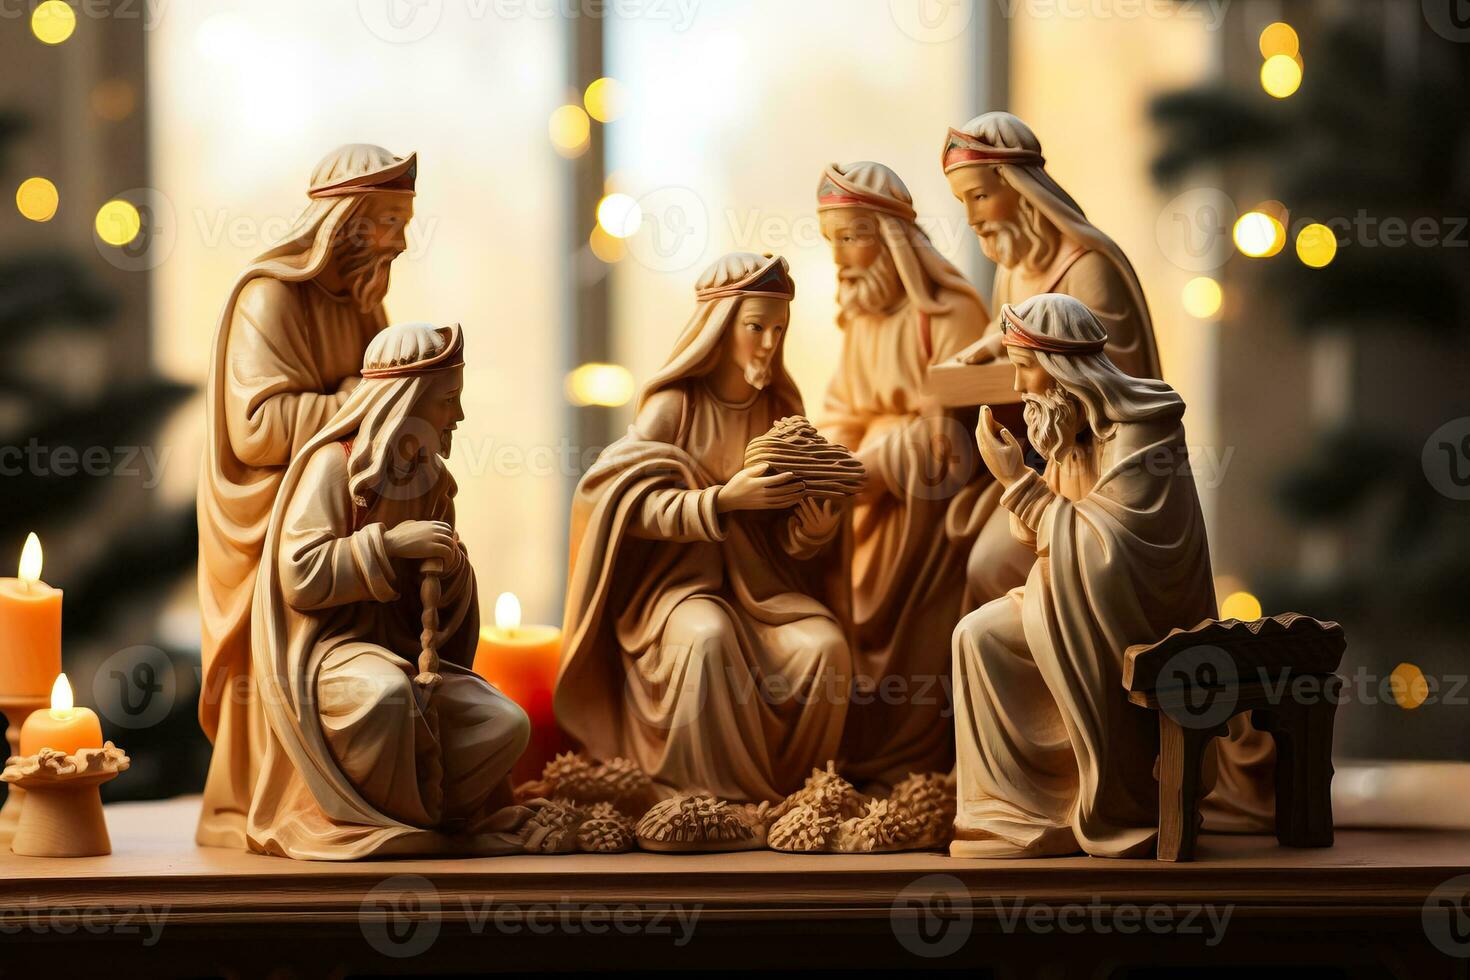 Depiction of a nativity set with hand-carved wooden figurines enacting the biblical Christmas story in a vintage setting photo